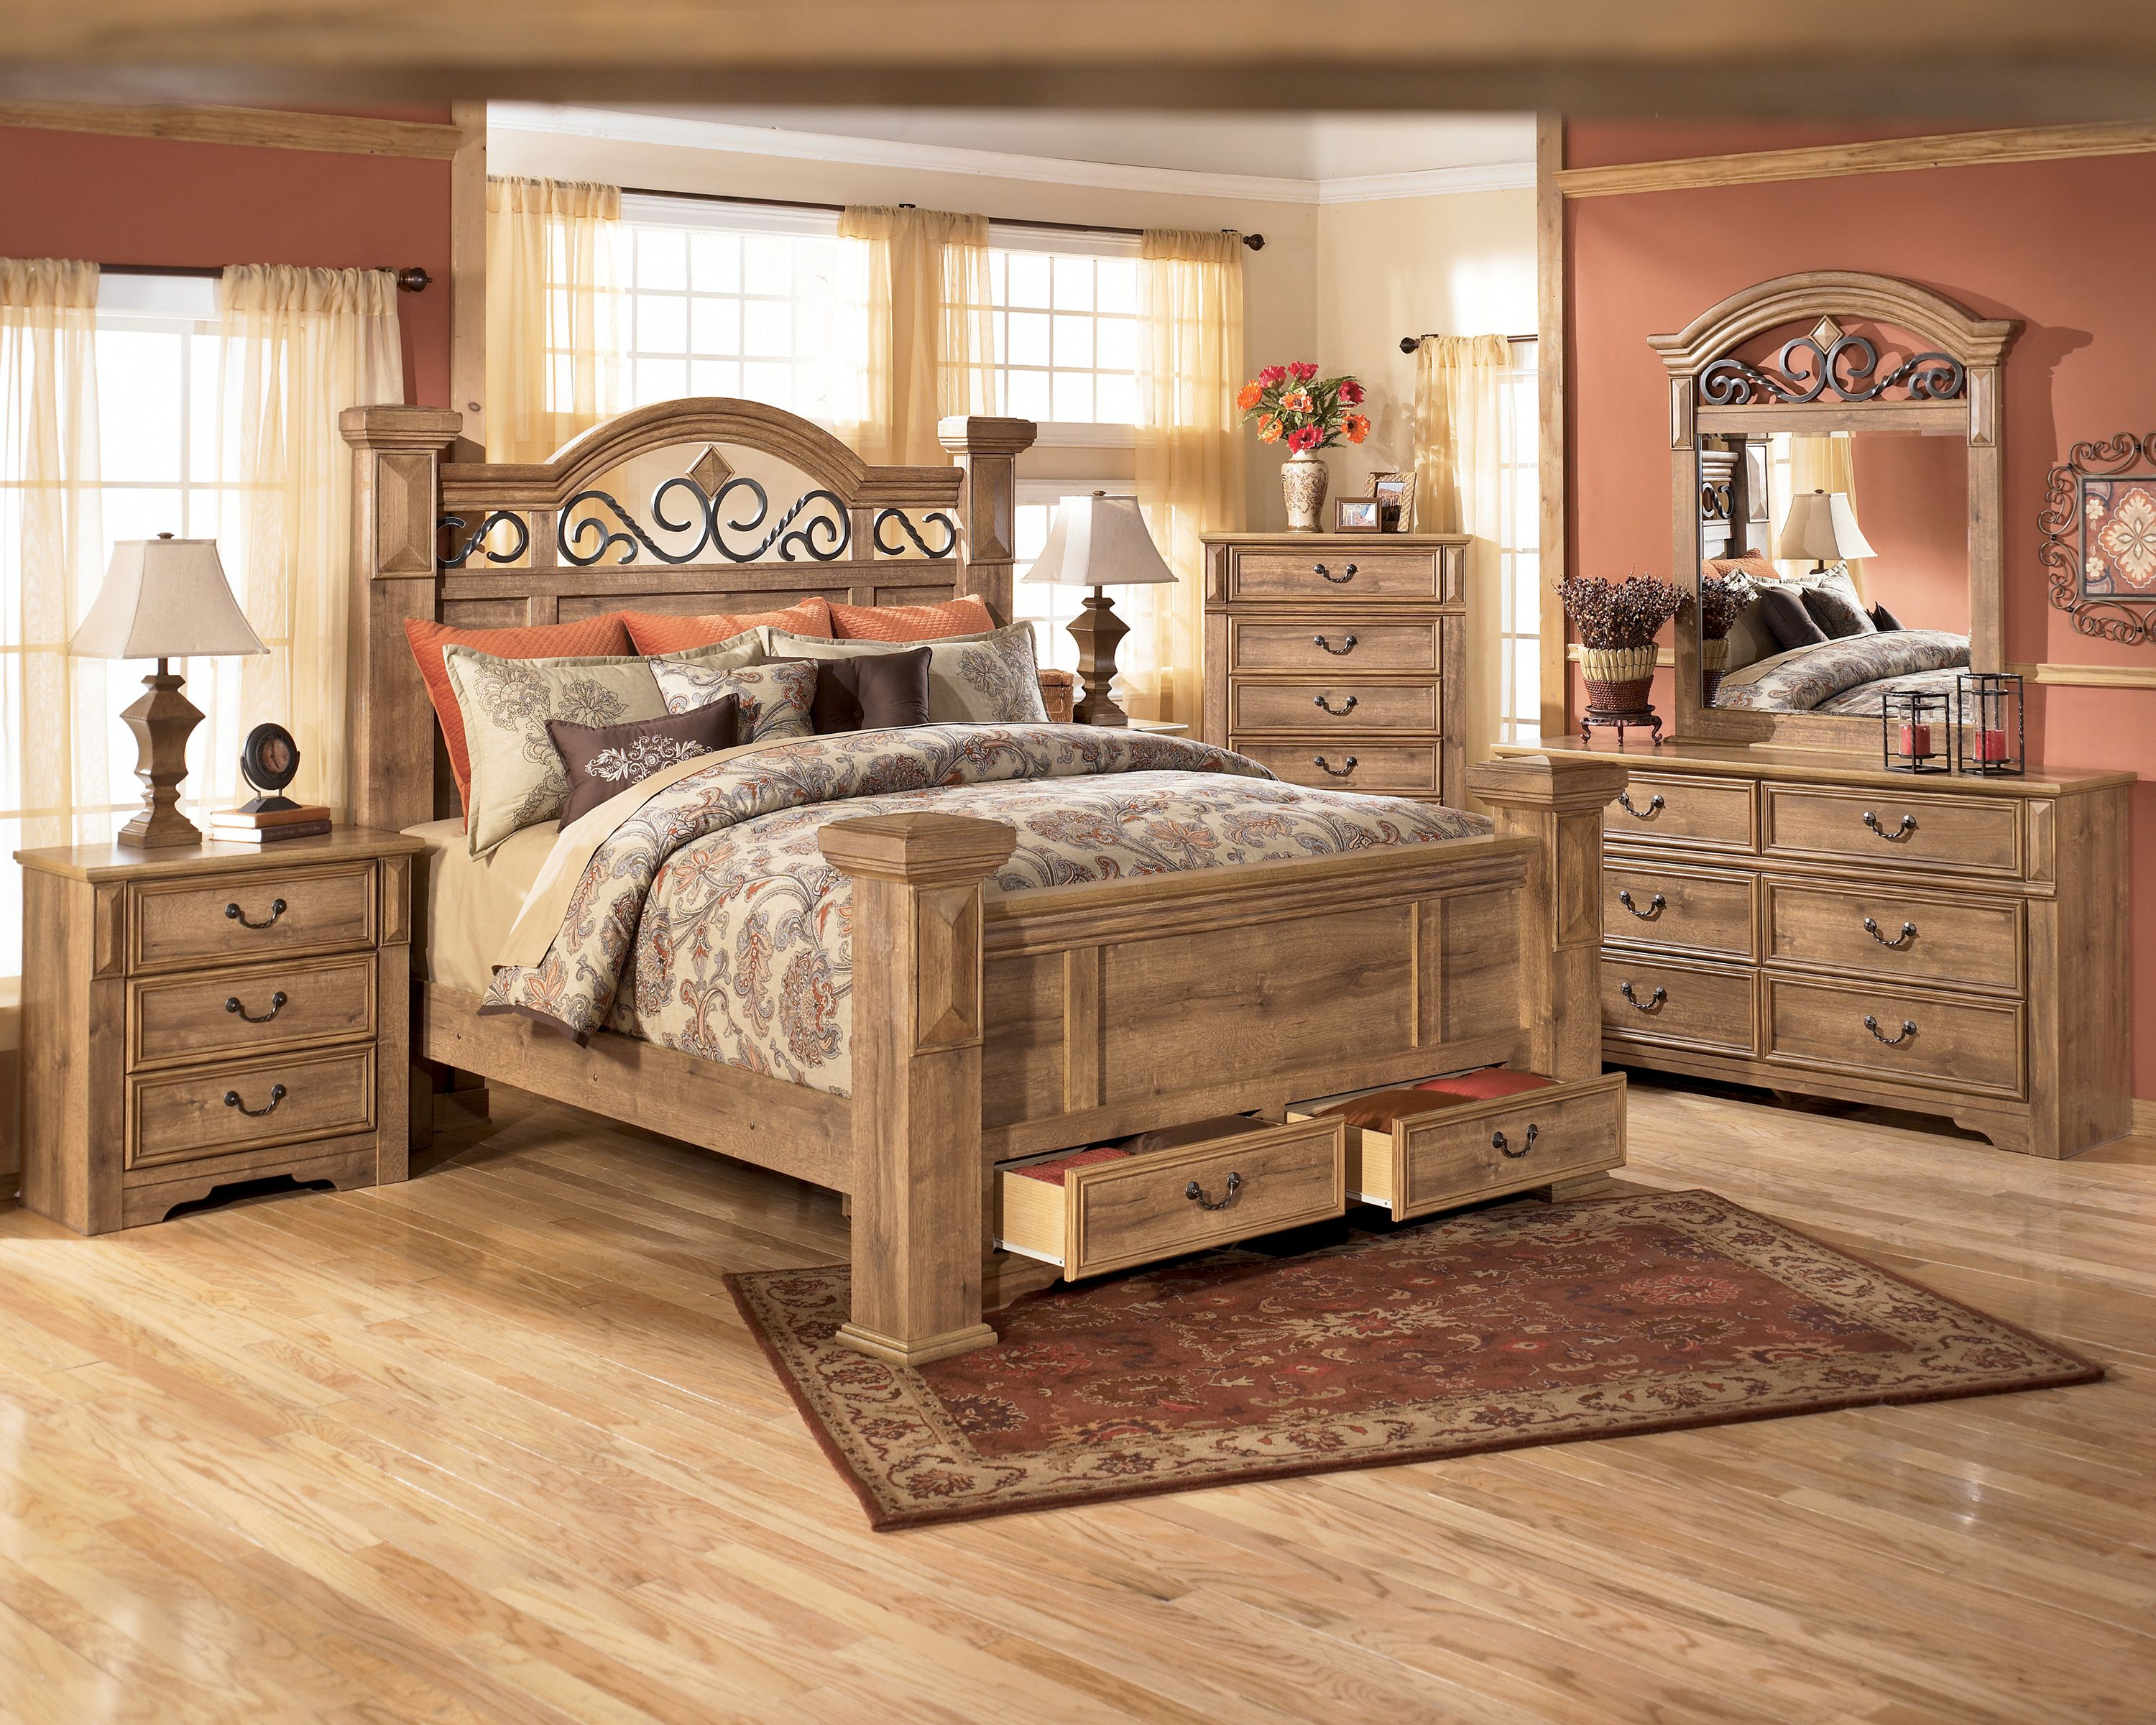 Awesome Awesome Full Size Bed Set 89 On Home Decorating Ideas With intended for dimensions 3000 X 2400